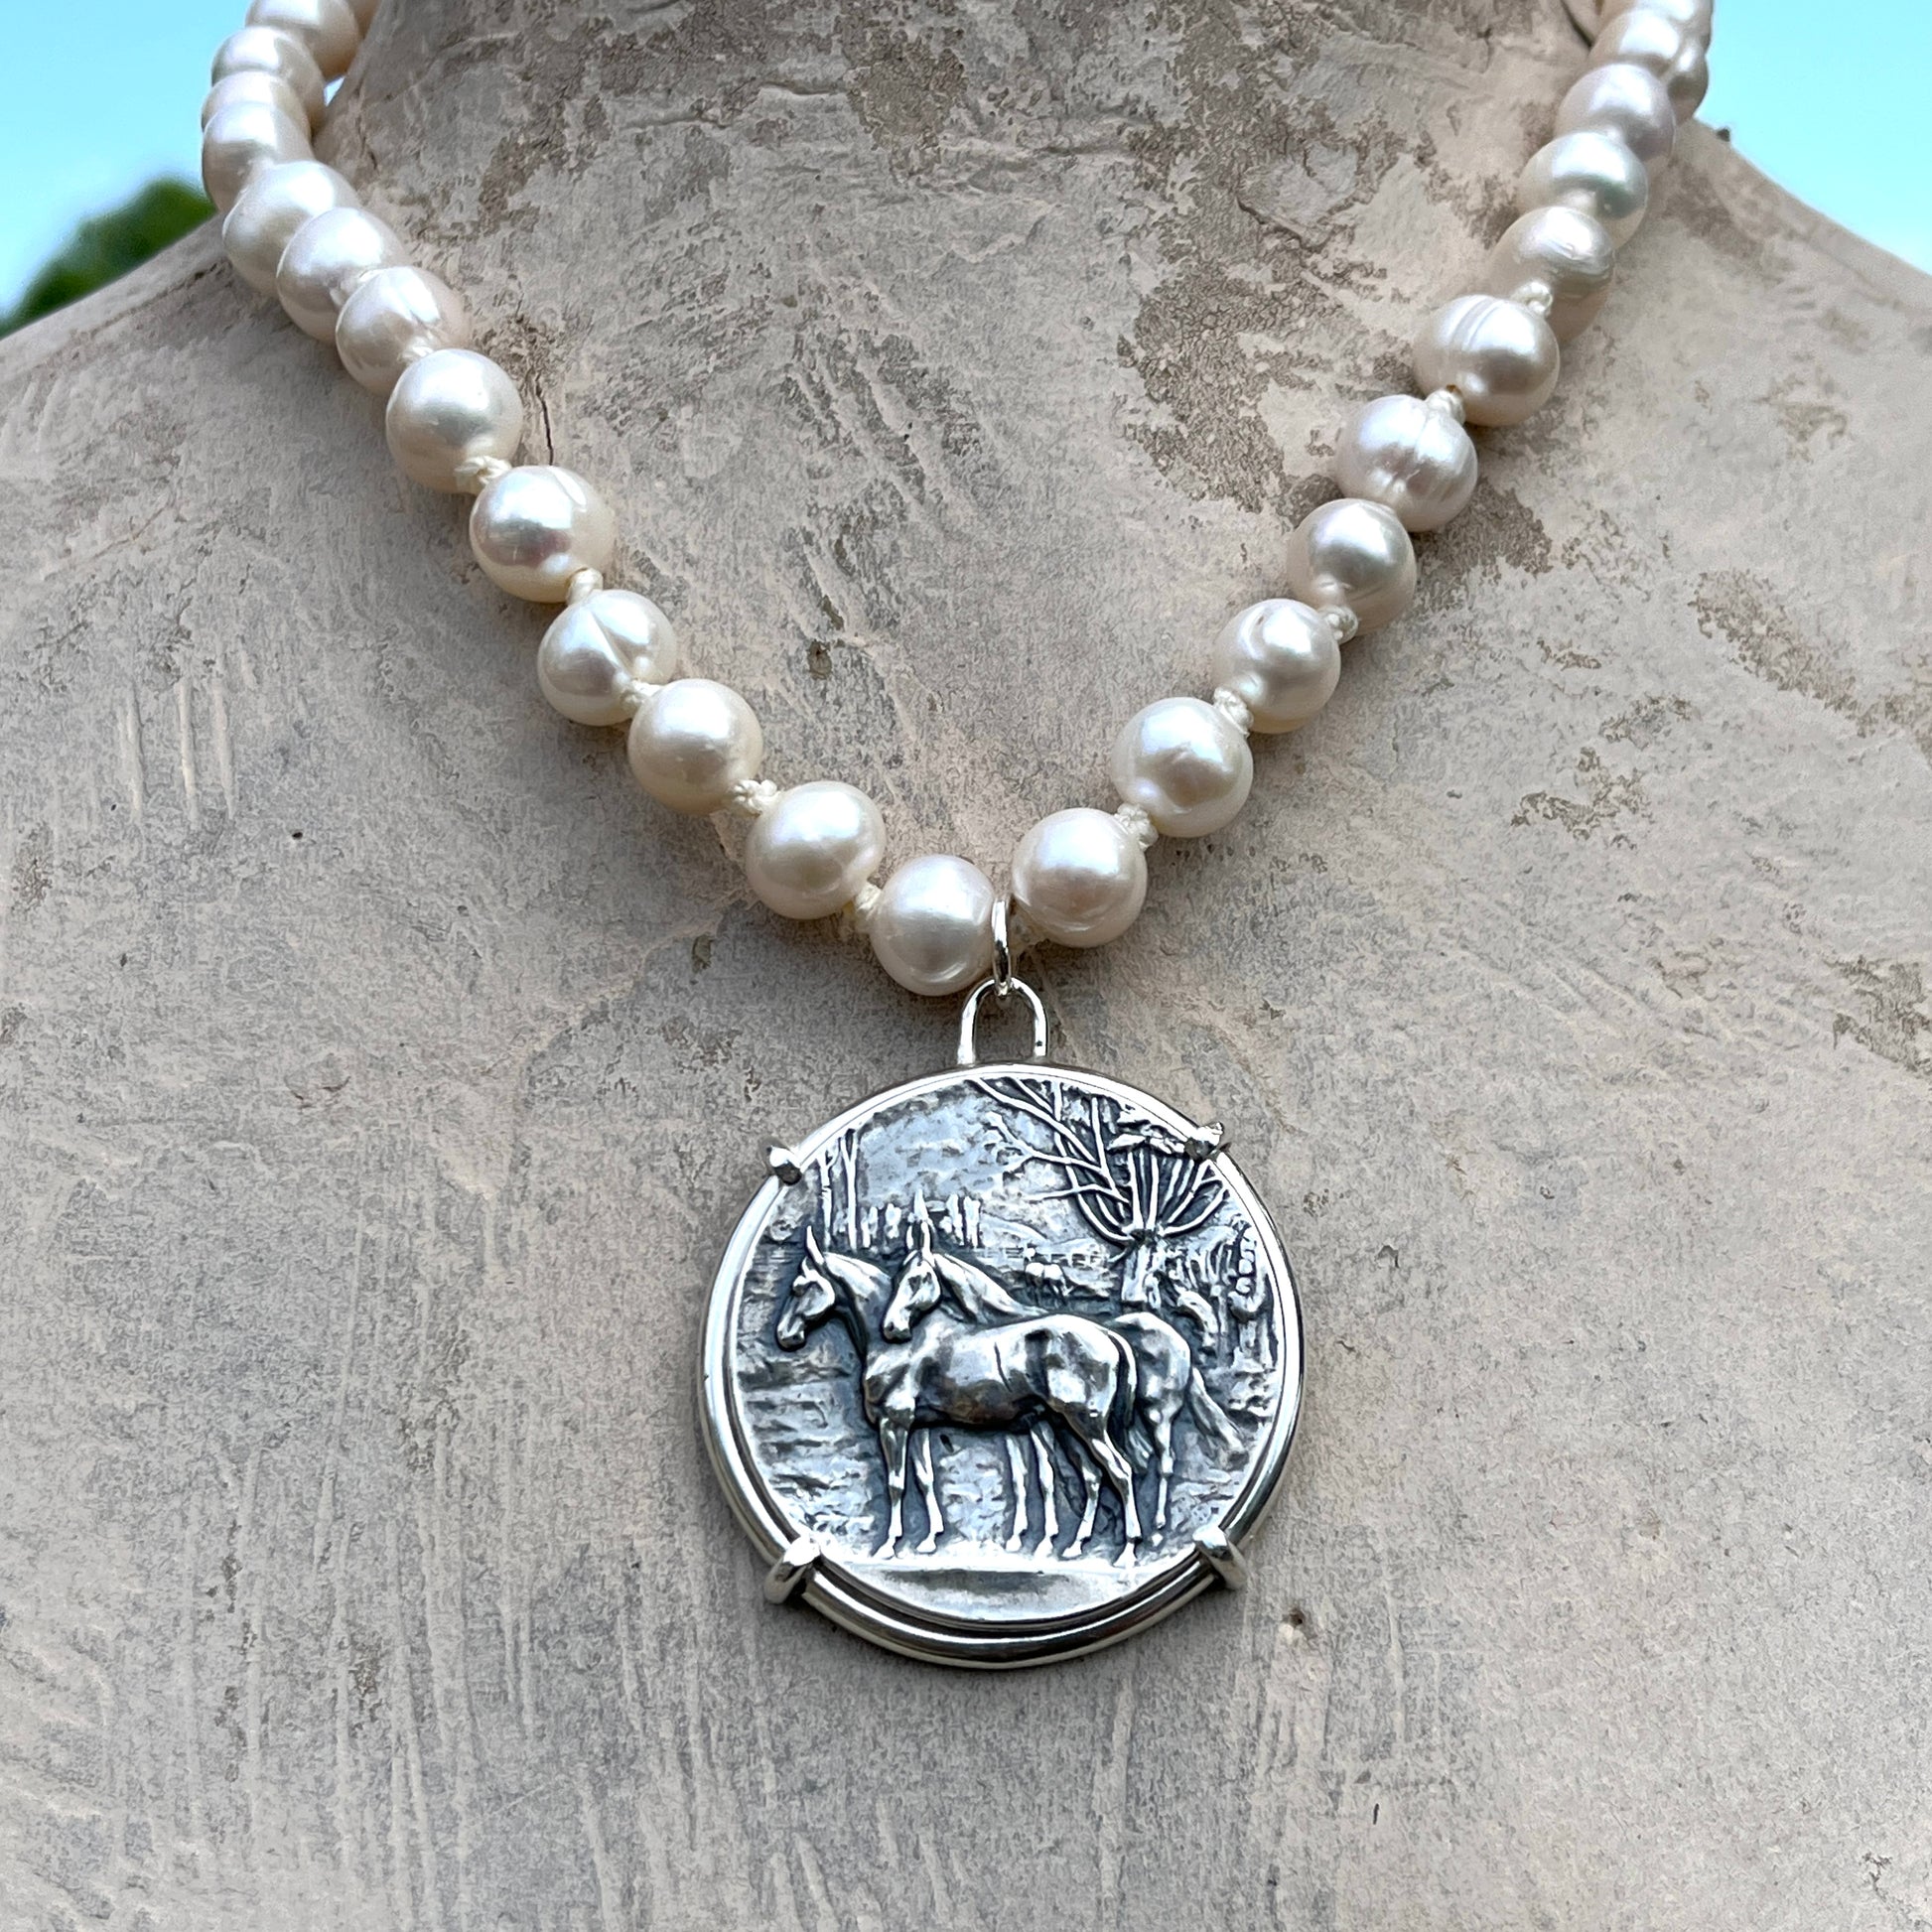 Pasture Pals Medal on Pearl Necklace